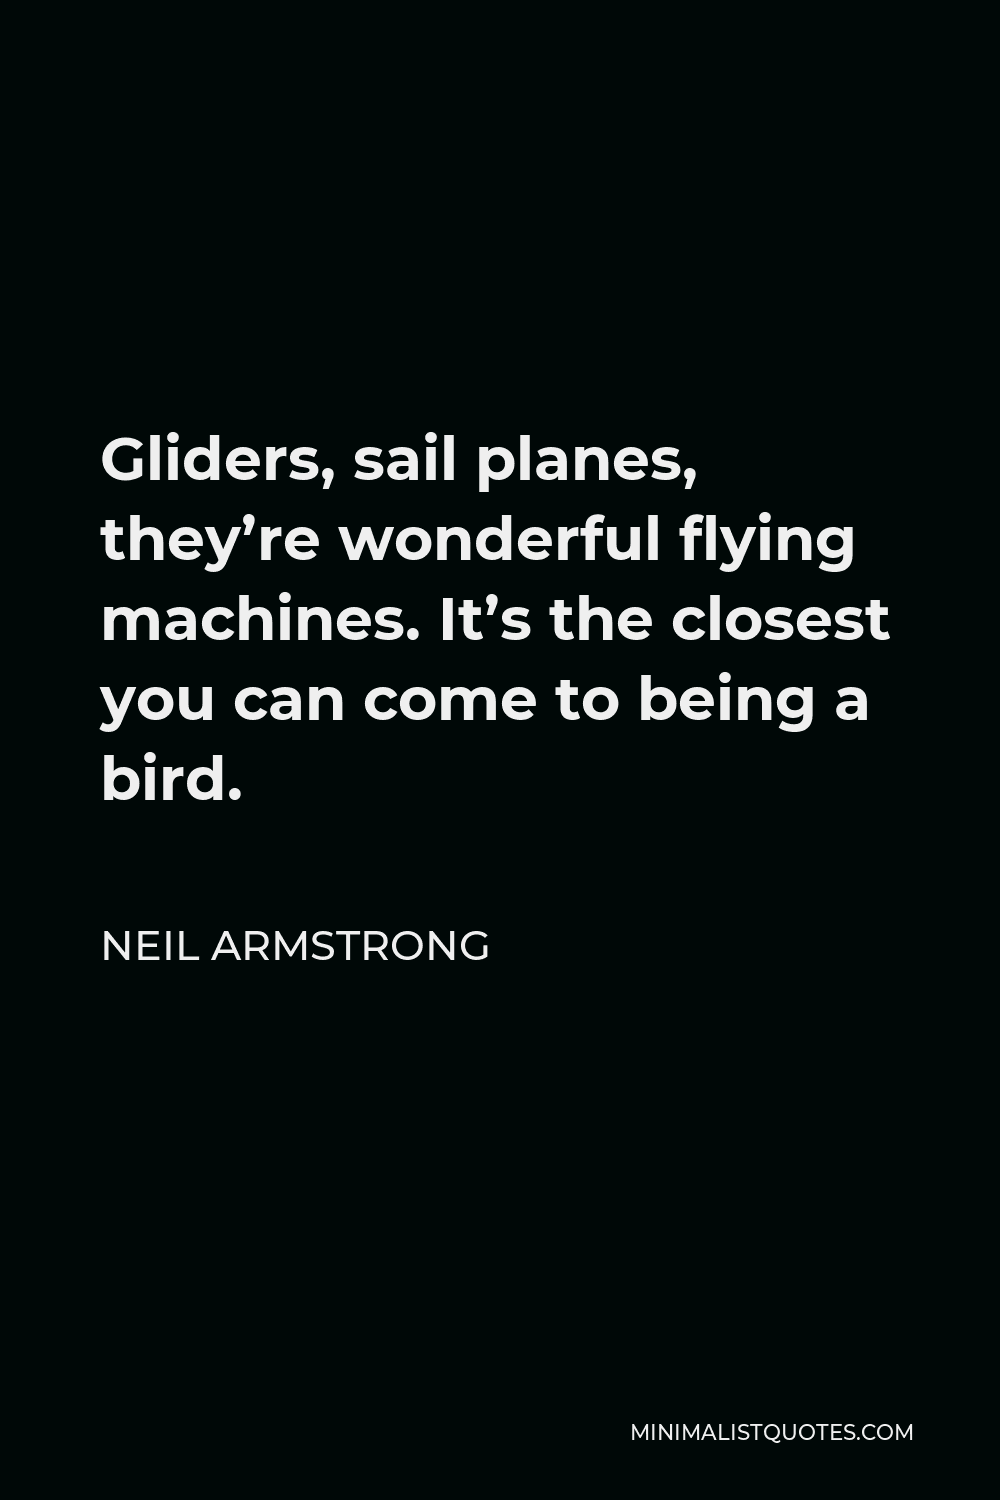 Neil Armstrong Quote - Gliders, sail planes, they’re wonderful flying machines. It’s the closest you can come to being a bird.